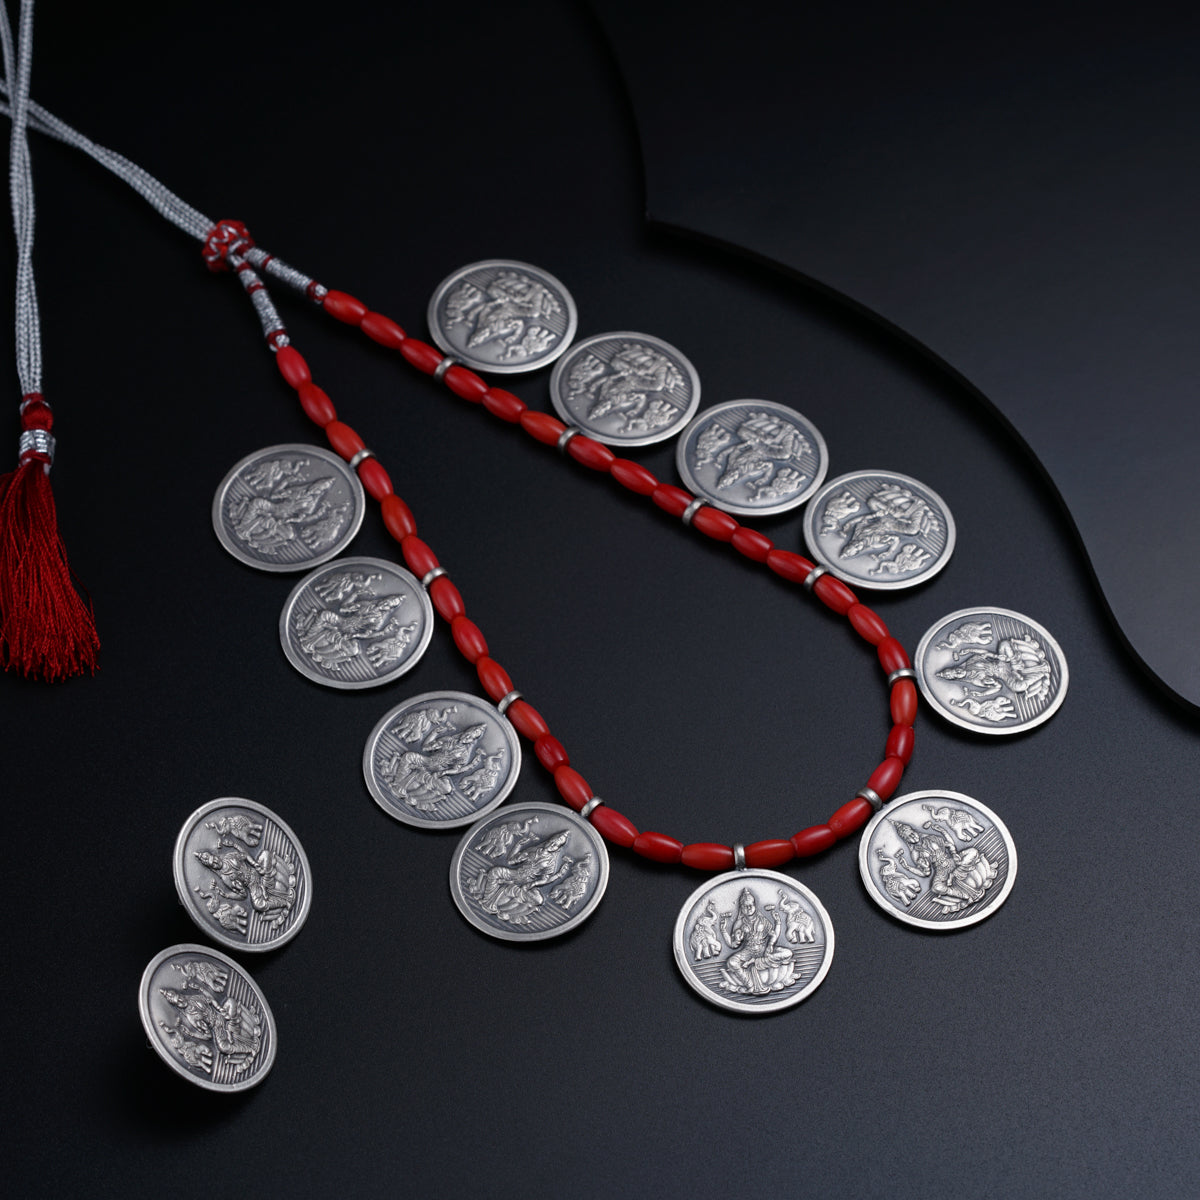 Silver Putali (Coin) Set with corals